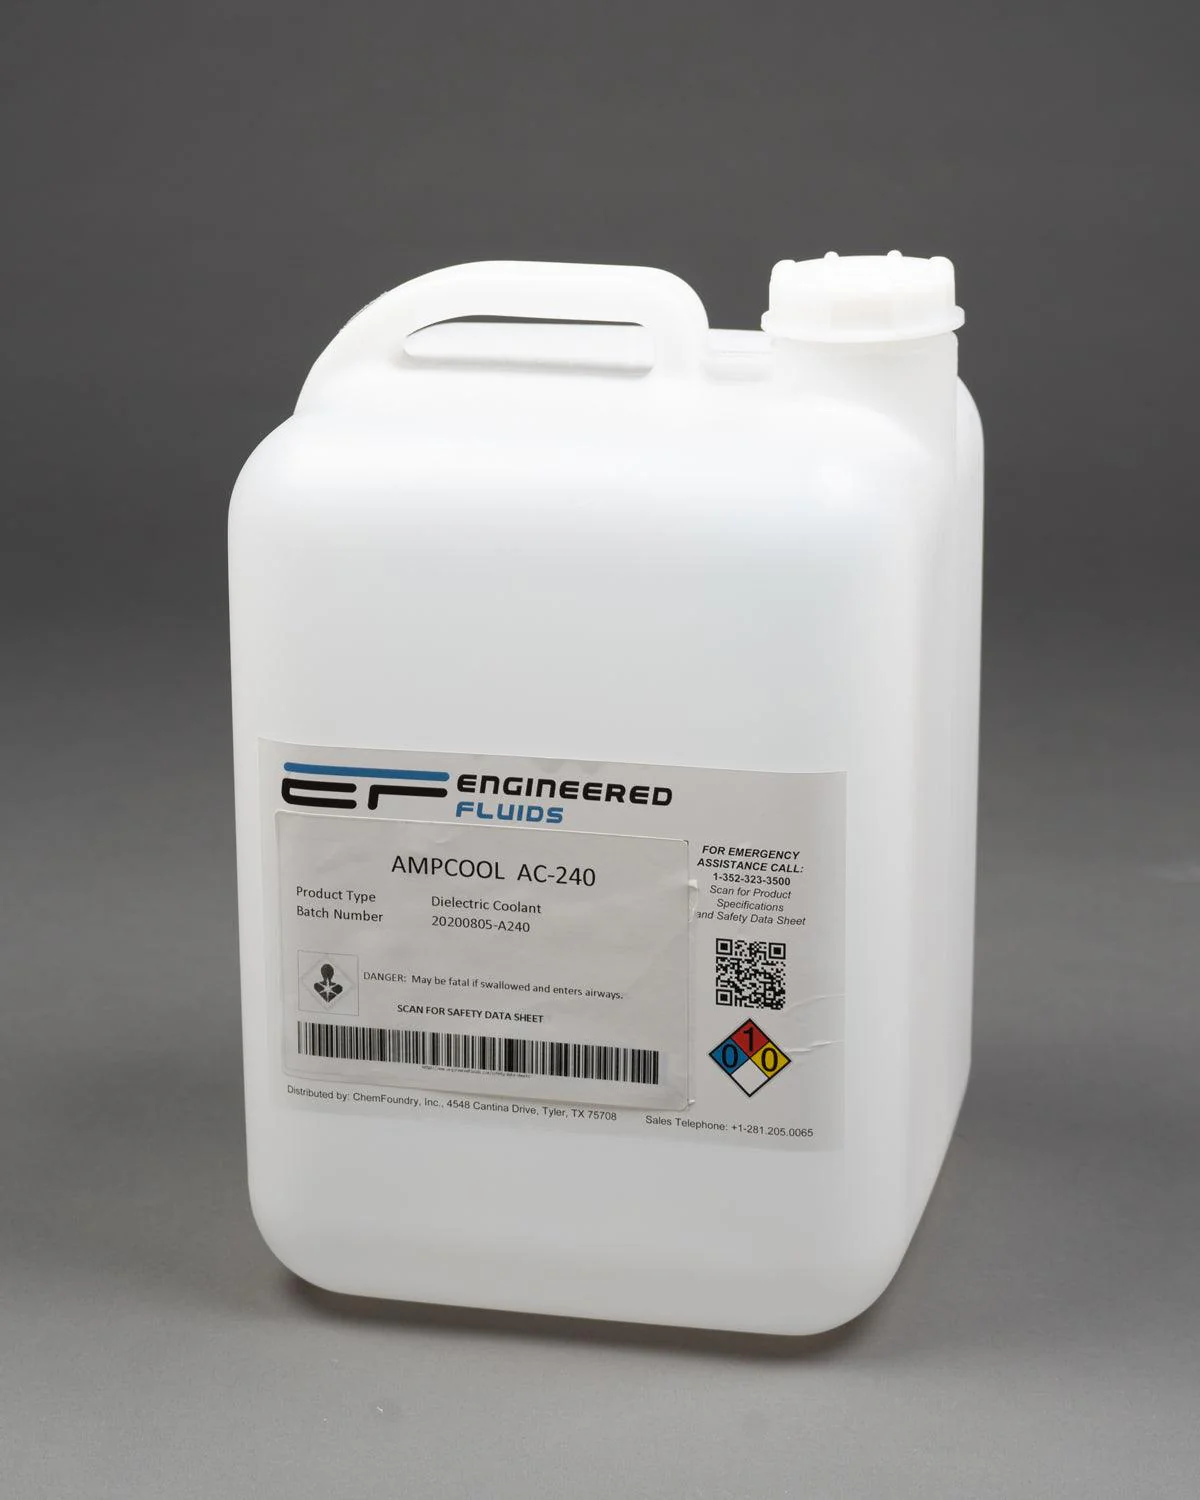 AmpCool® AC-240 Dielectric Coolant & Lubricant Questions & Answers